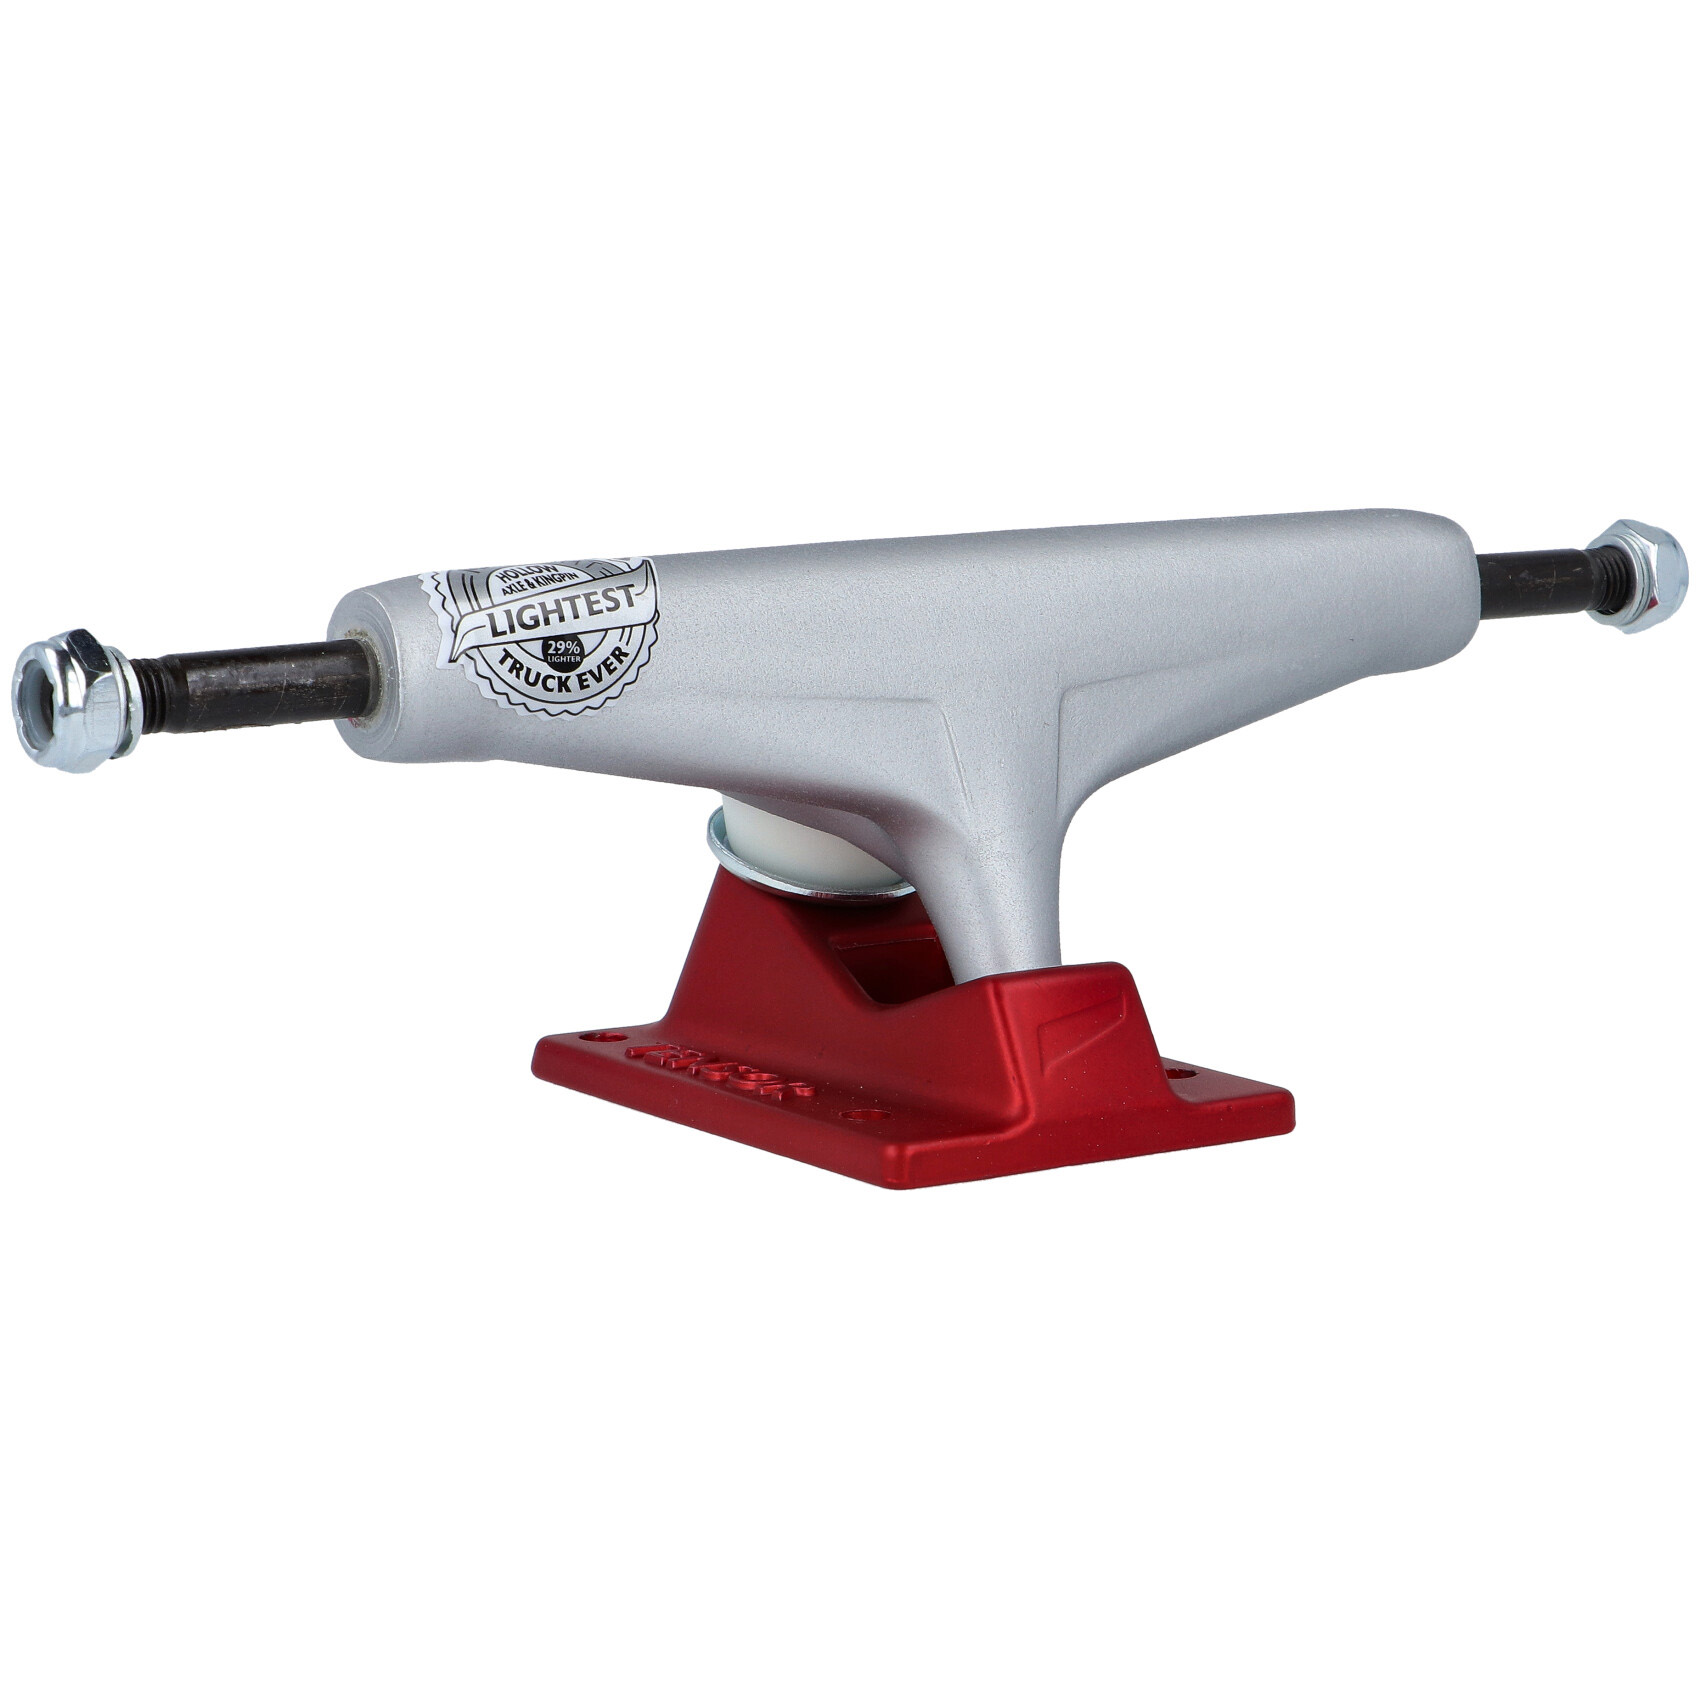 Tensor Skateboardachse Mag Light Reflect 5.5" (silver red)